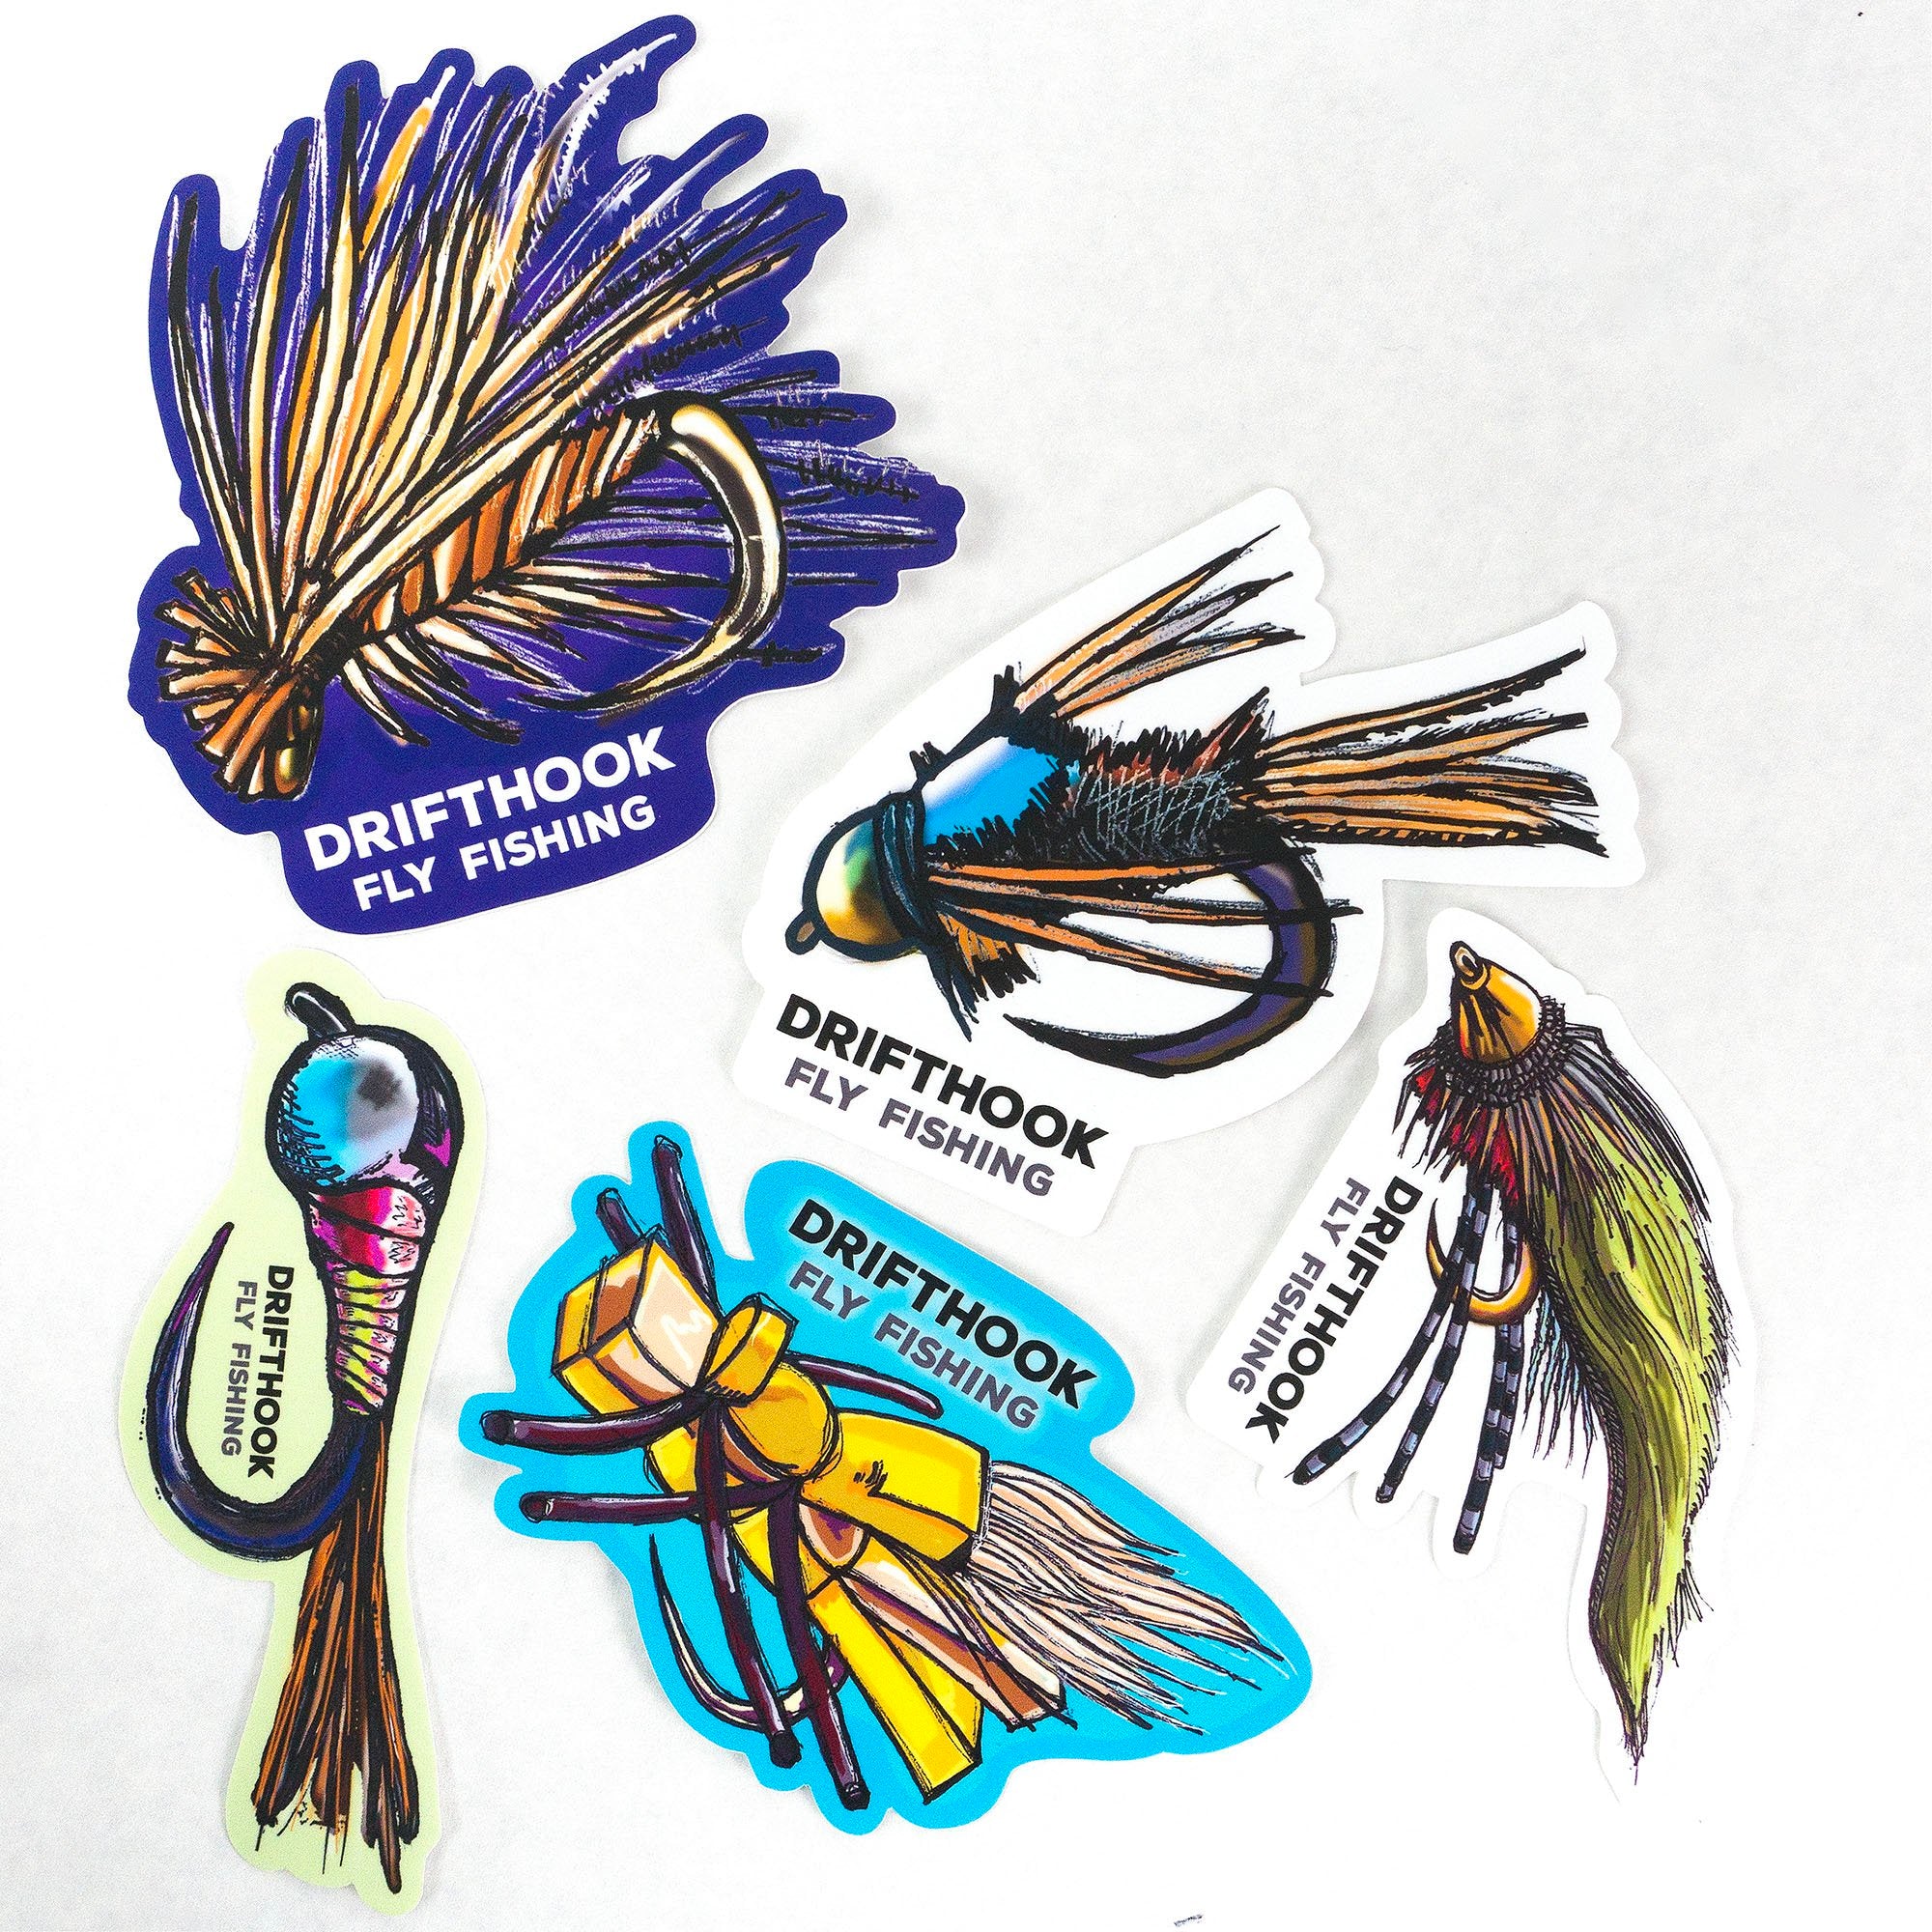 Cortland Line Die-Cut Sticker - Fly Slaps Fly Fishing Stickers and